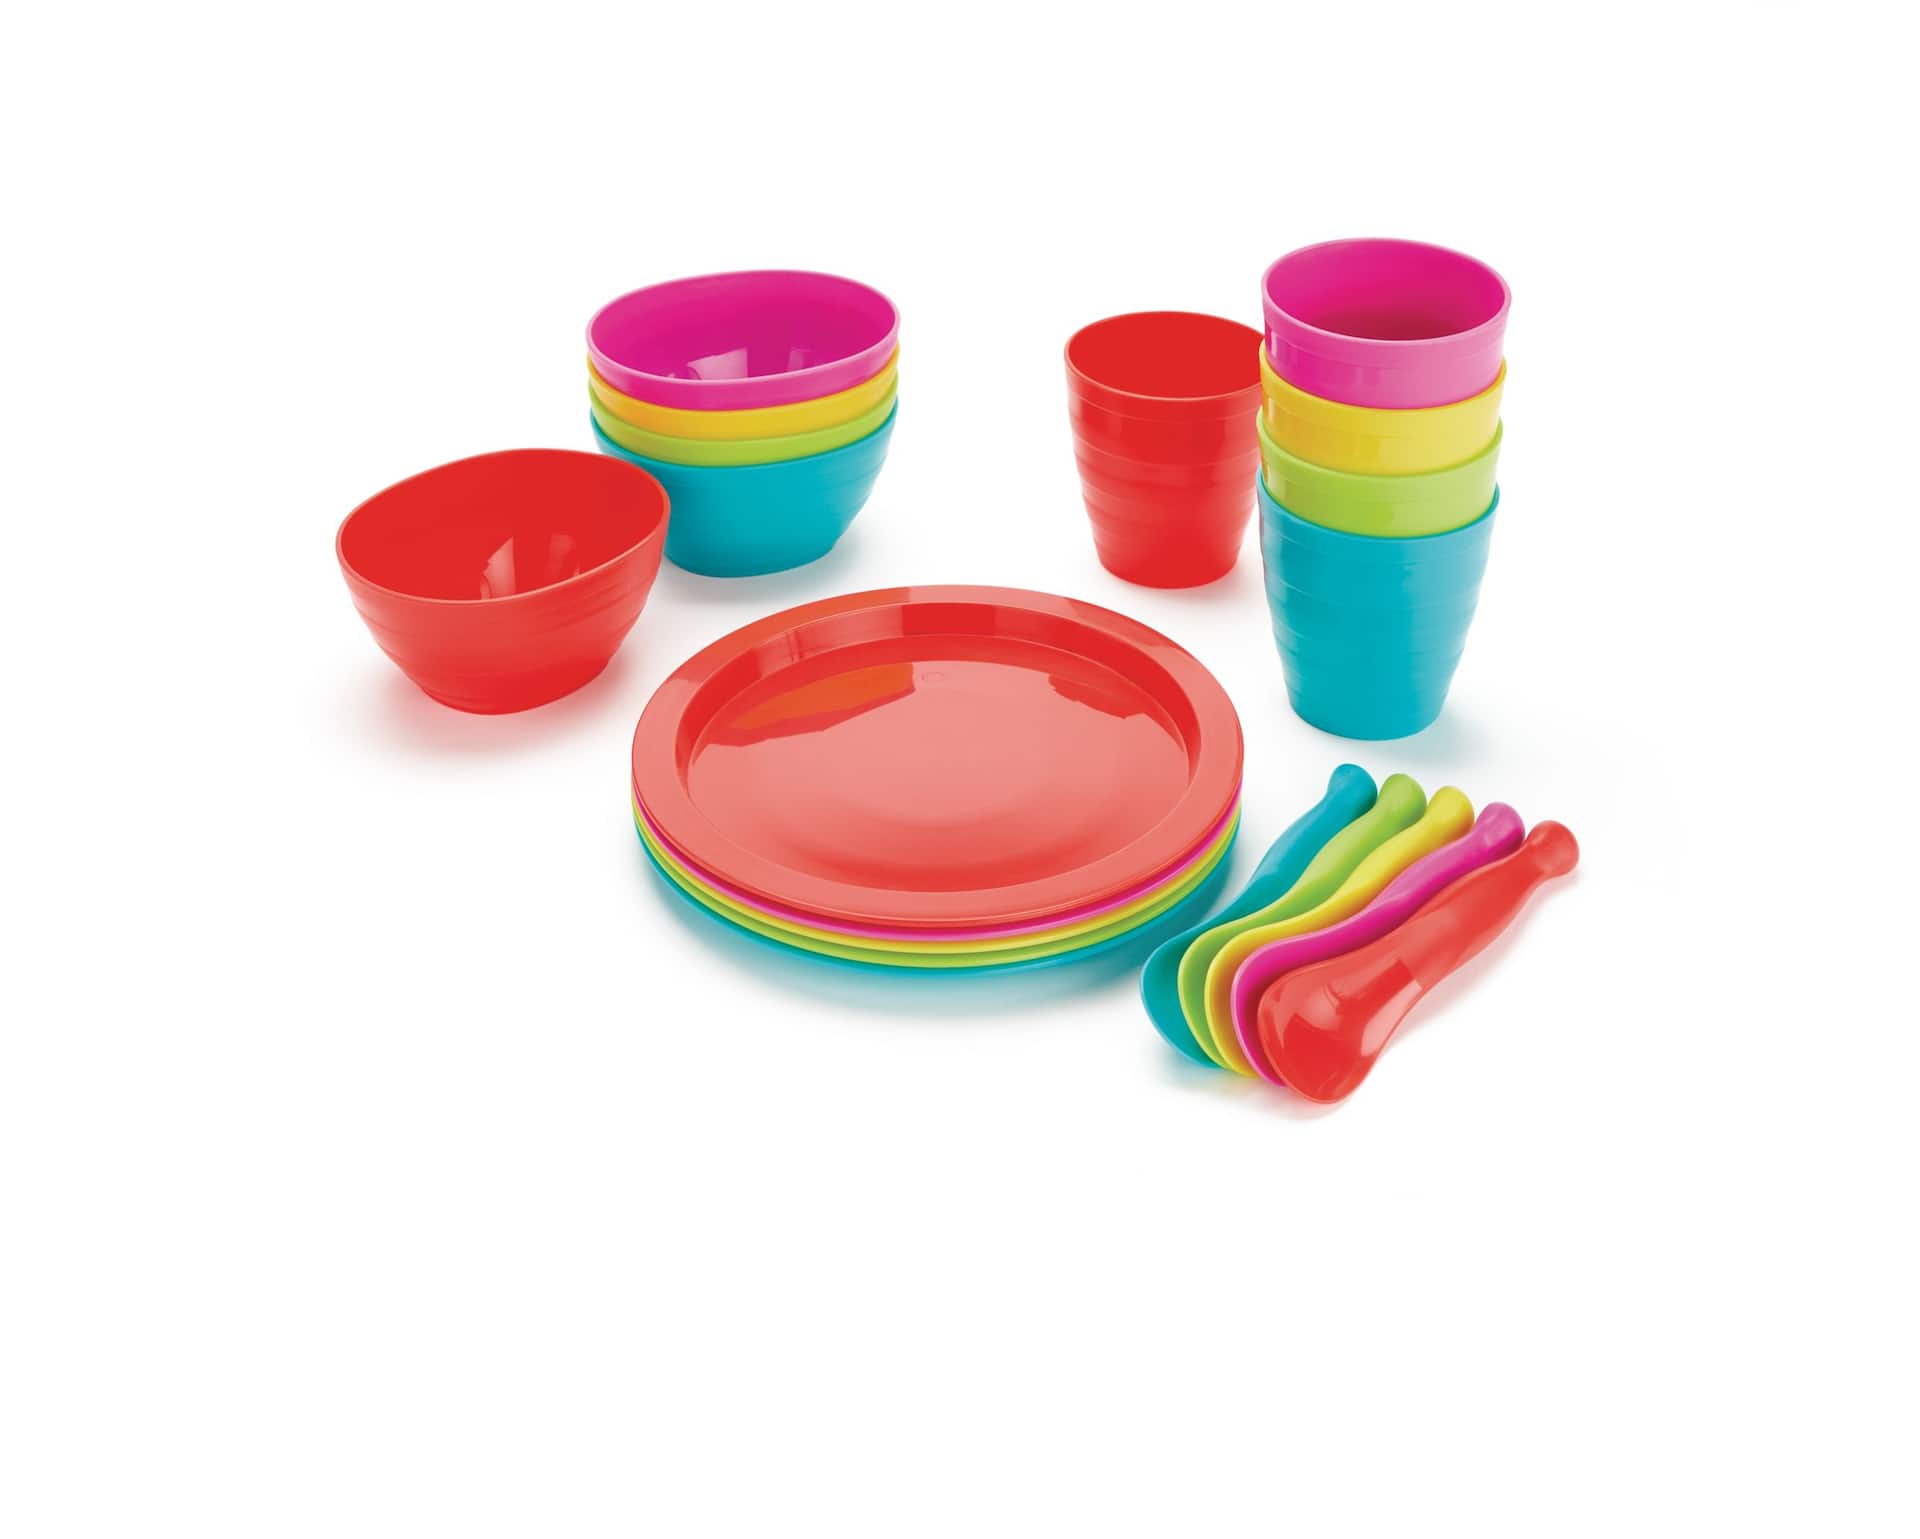 Tire　Colours　Canadian　24-pc,　Tableware　Plastic　Free,　BPA　Set,　Kids　Home　Core　Assorted